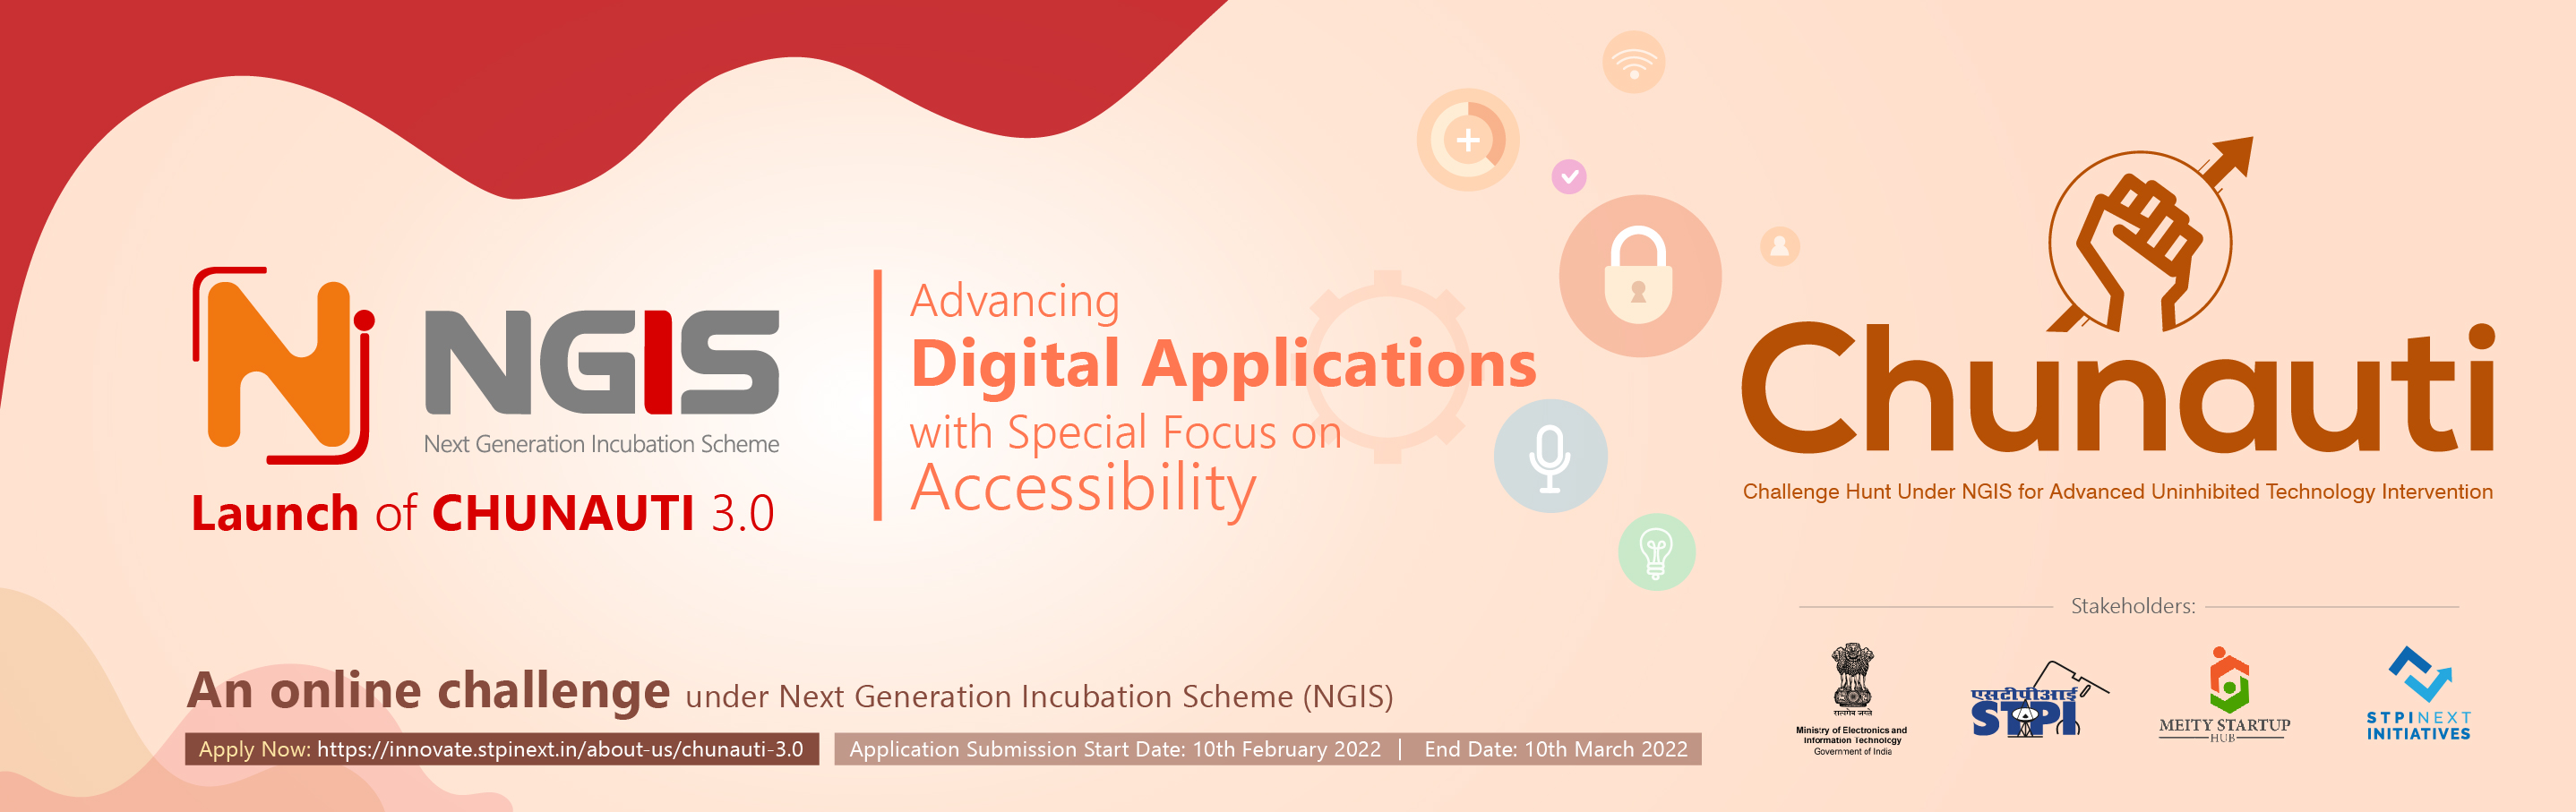 CHUNAUTI 3.0 To Deepen Digital Inclusion through Digital Accessibility Solutions